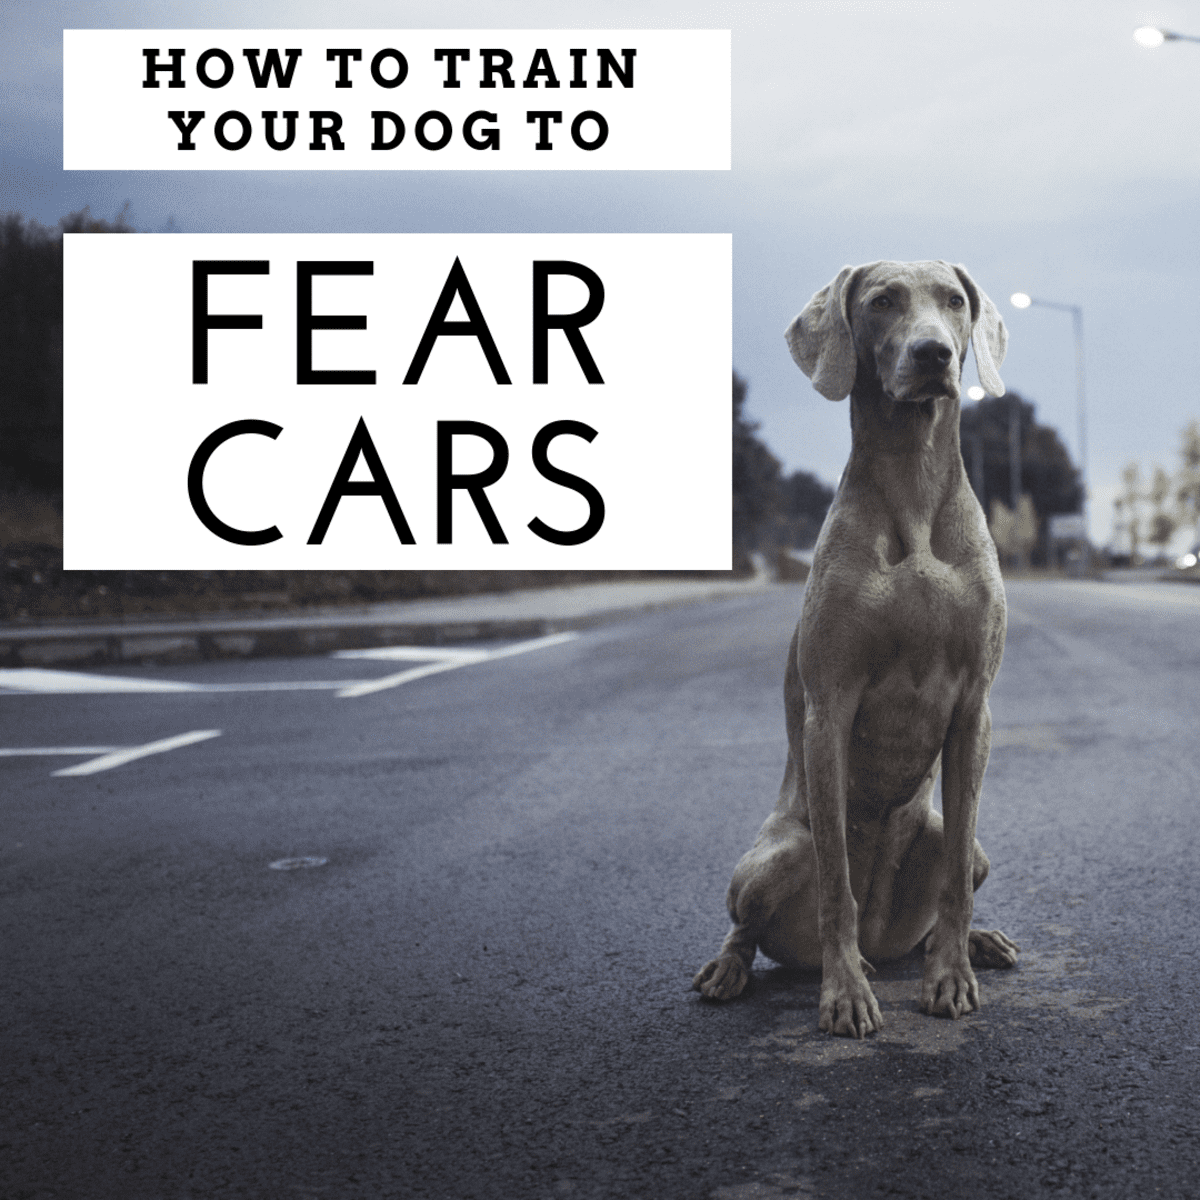 why are dogs afraid of cars